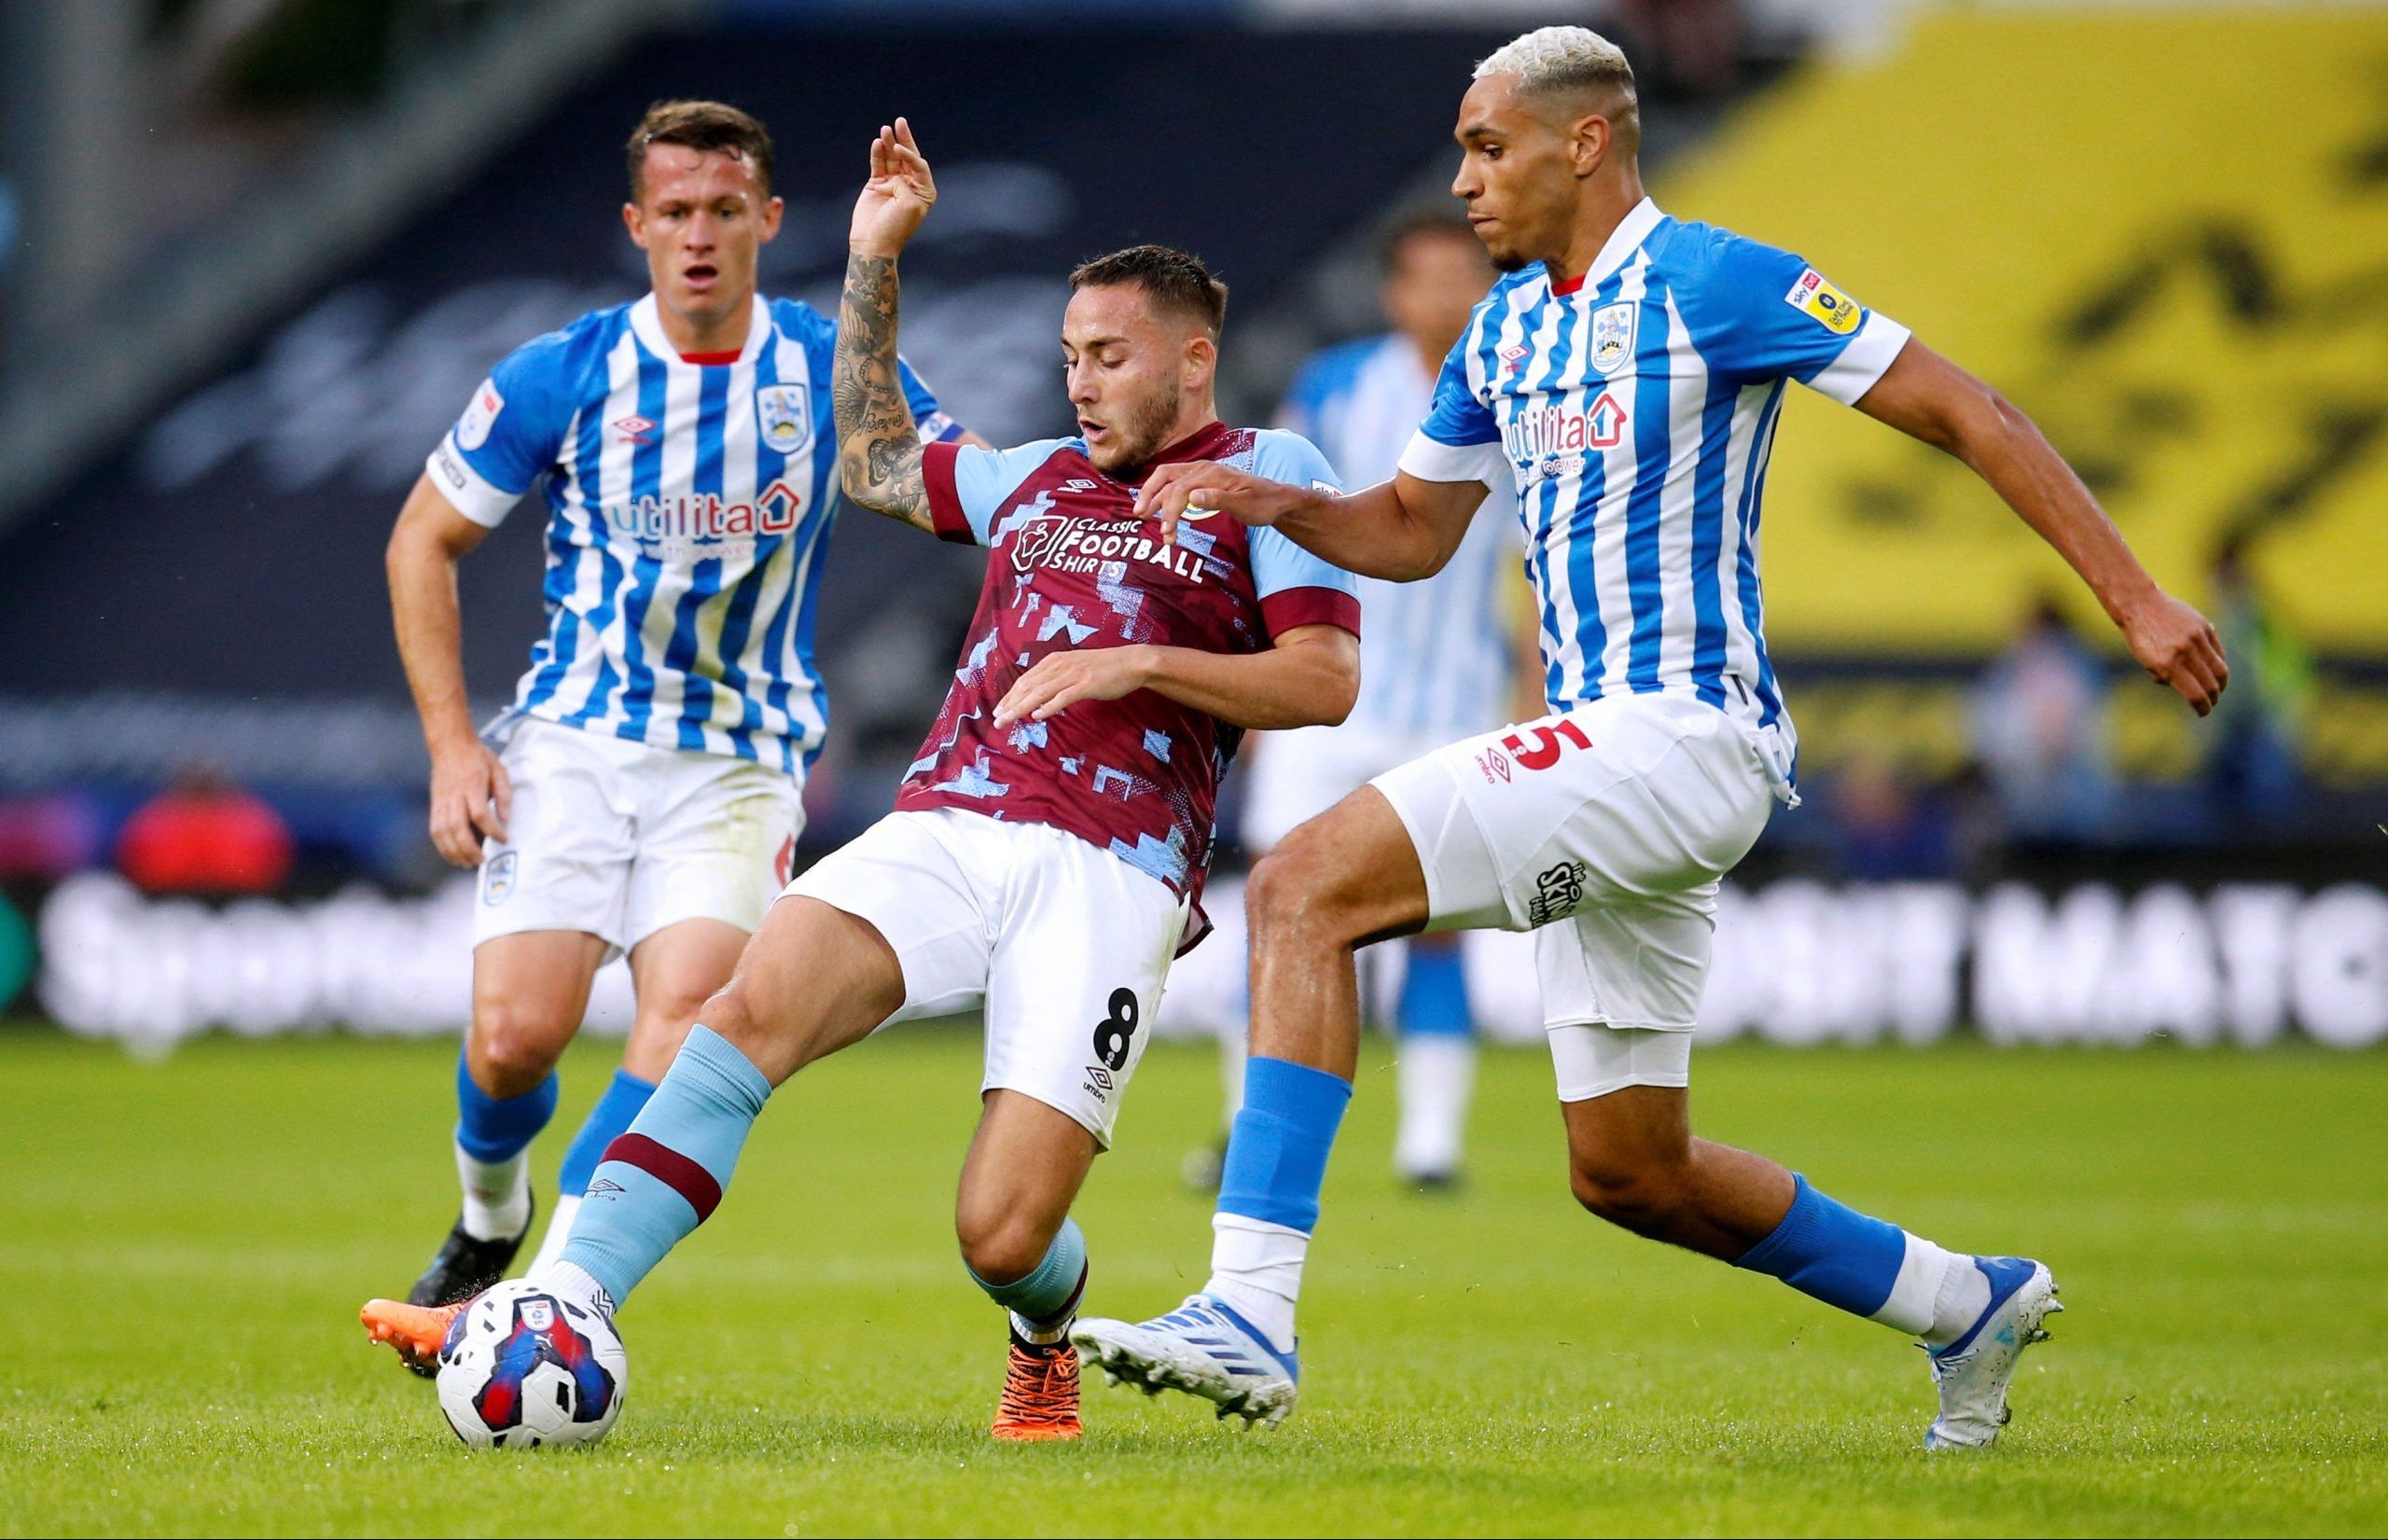 Soccer Football - Championship - Huddersfield Town v Burnley - John Smith's Stadium, Huddersfield, Britain - July 29, 2022  Burnley's Josh Brownhill in action with Huddersfield Town's Jon Russell  Action Images/Ed Sykes  EDITORIAL USE ONLY. No use with unauthorized audio, video, data, fixture lists, club/league logos or 